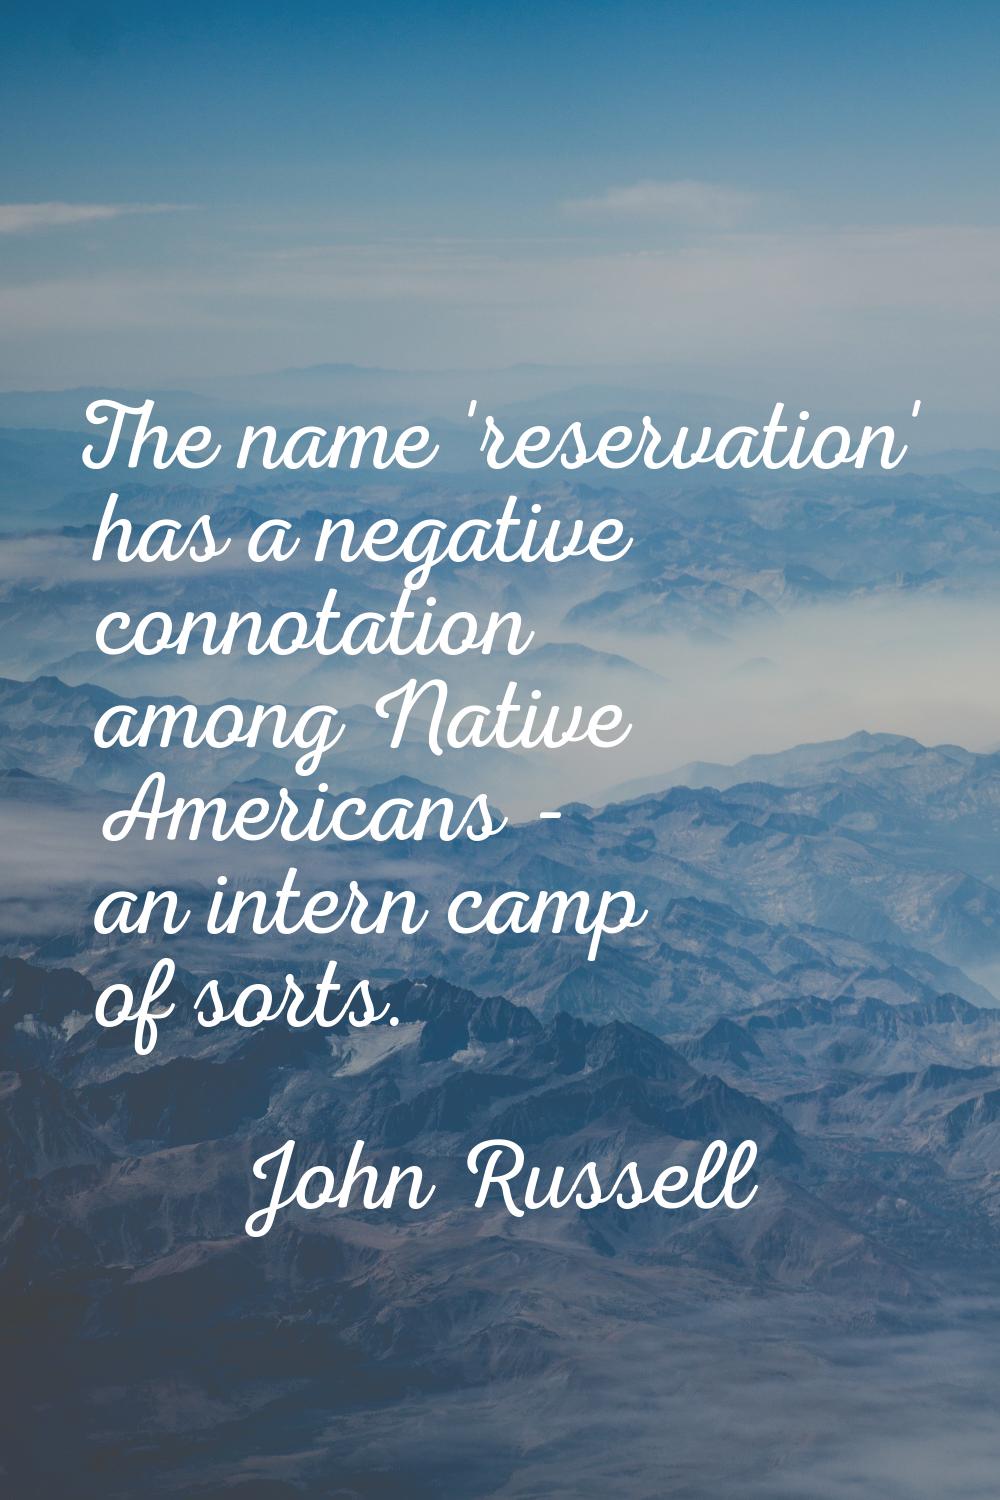 The name 'reservation' has a negative connotation among Native Americans - an intern camp of sorts.